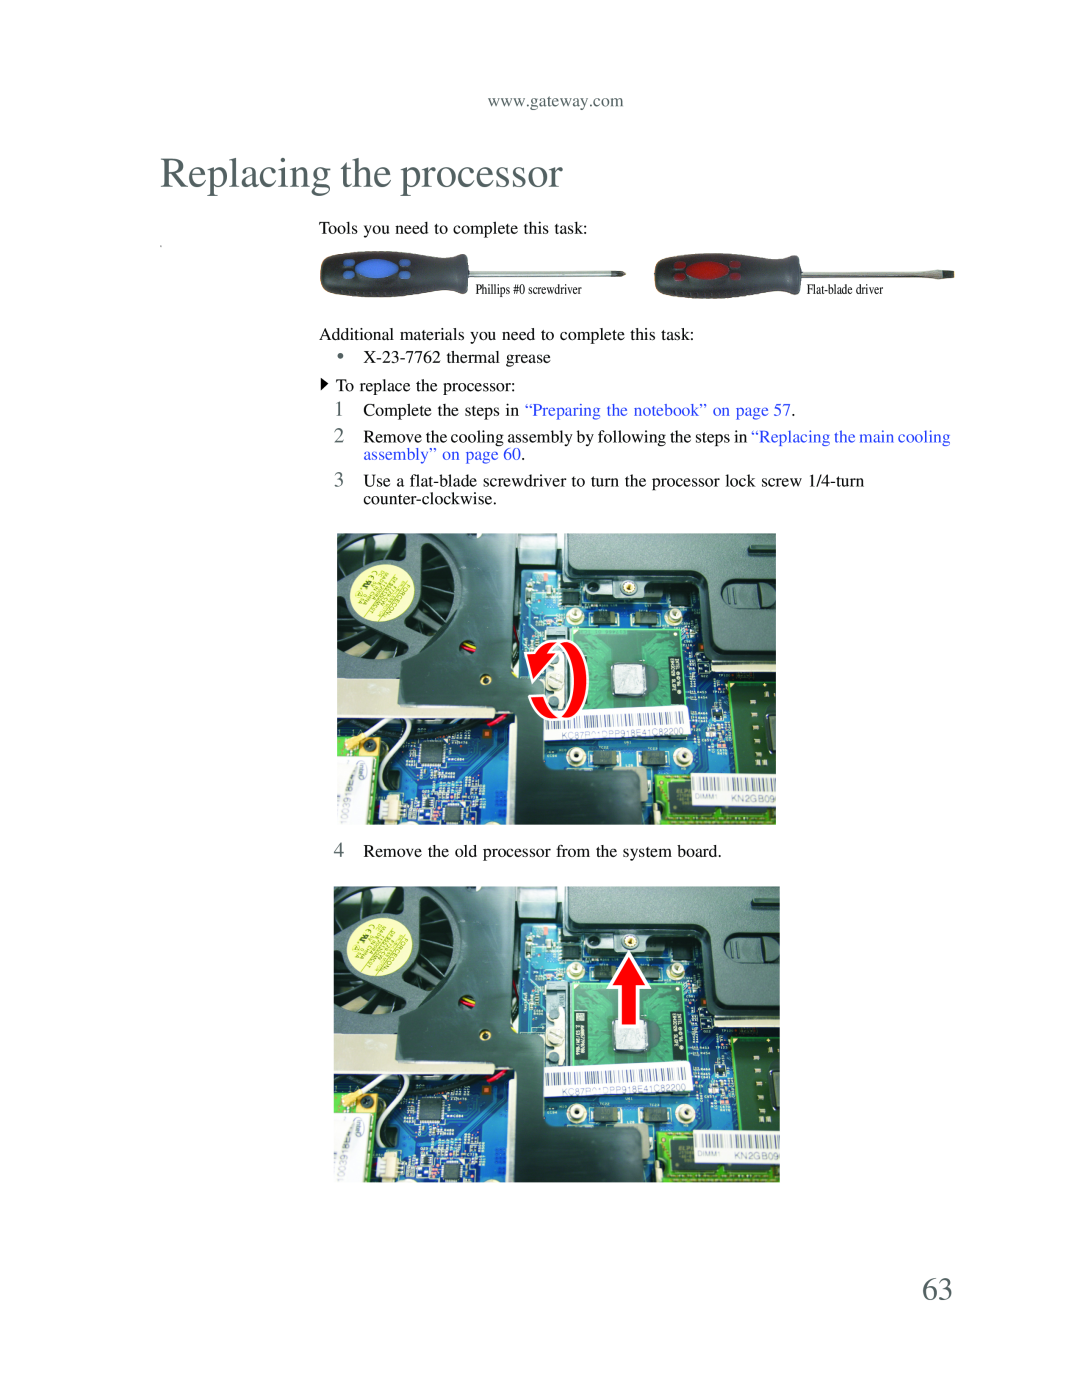 Gateway p-79 manual Replacing the processor, Complete the steps in “Preparing the notebook” on page, Flat-blade driver 